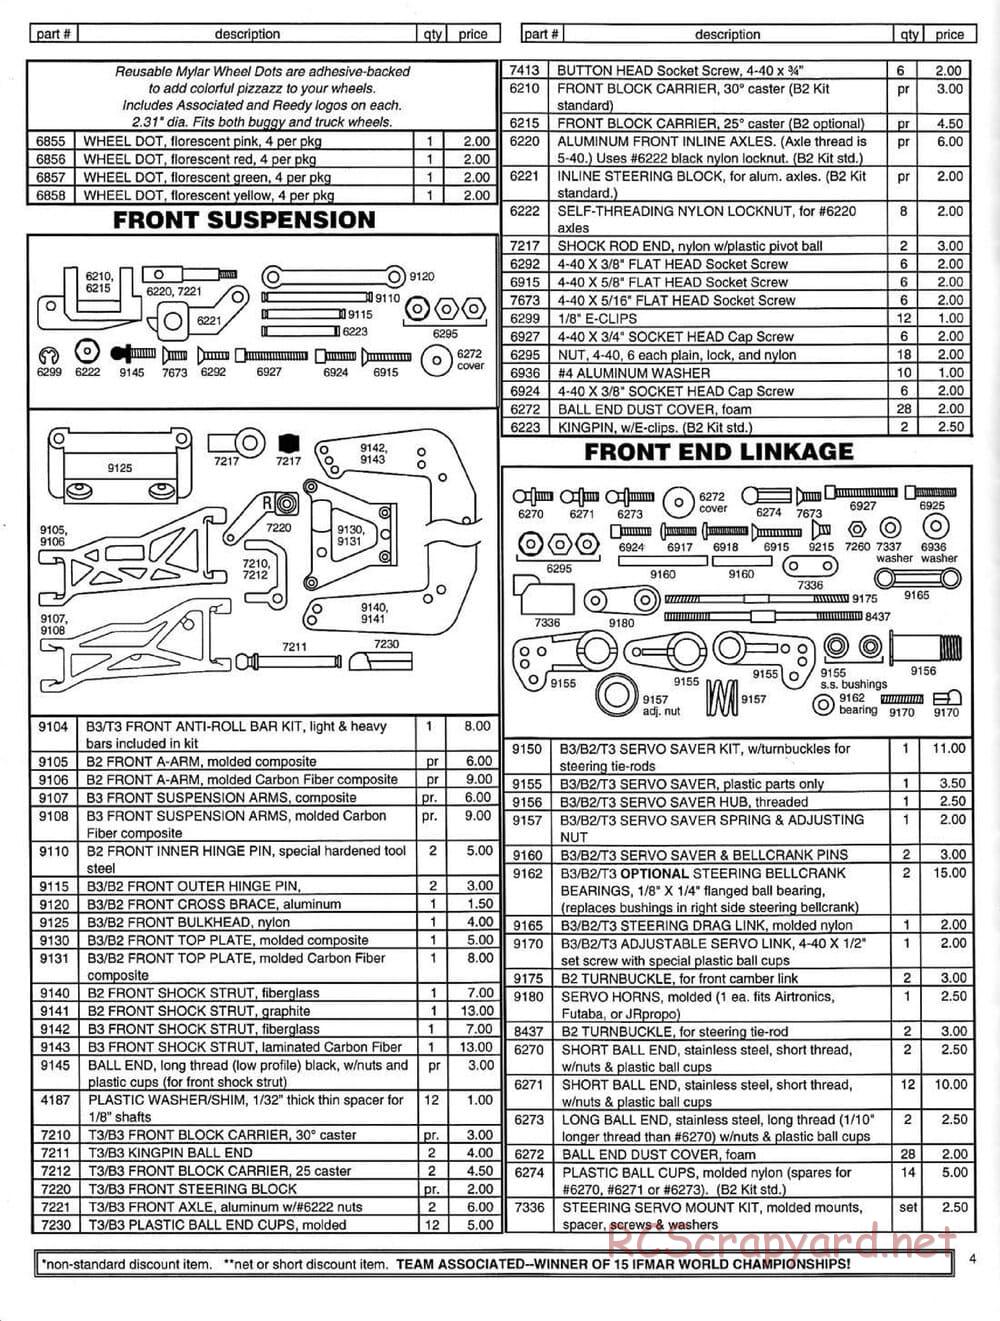 Team Associated - RC10 B3 - 1997 Parts Catalog - Page 4